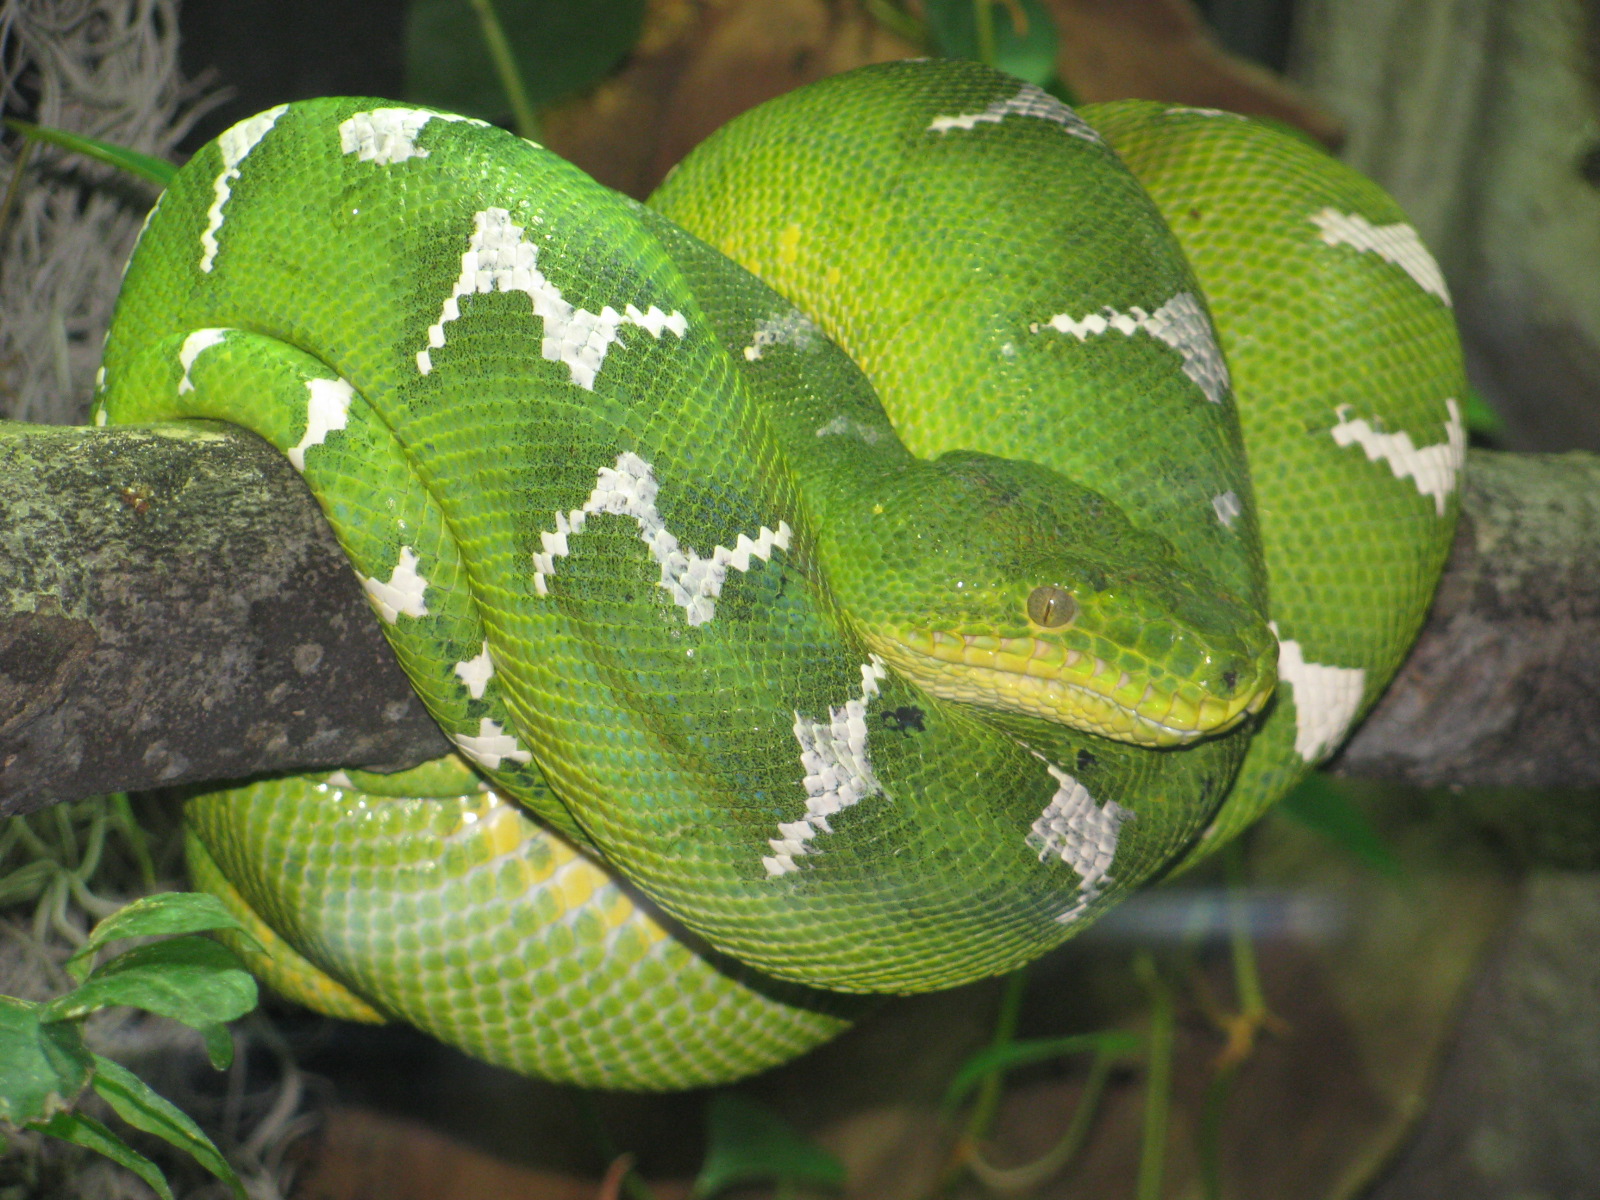 a green snake wrapped around a nch in the wild